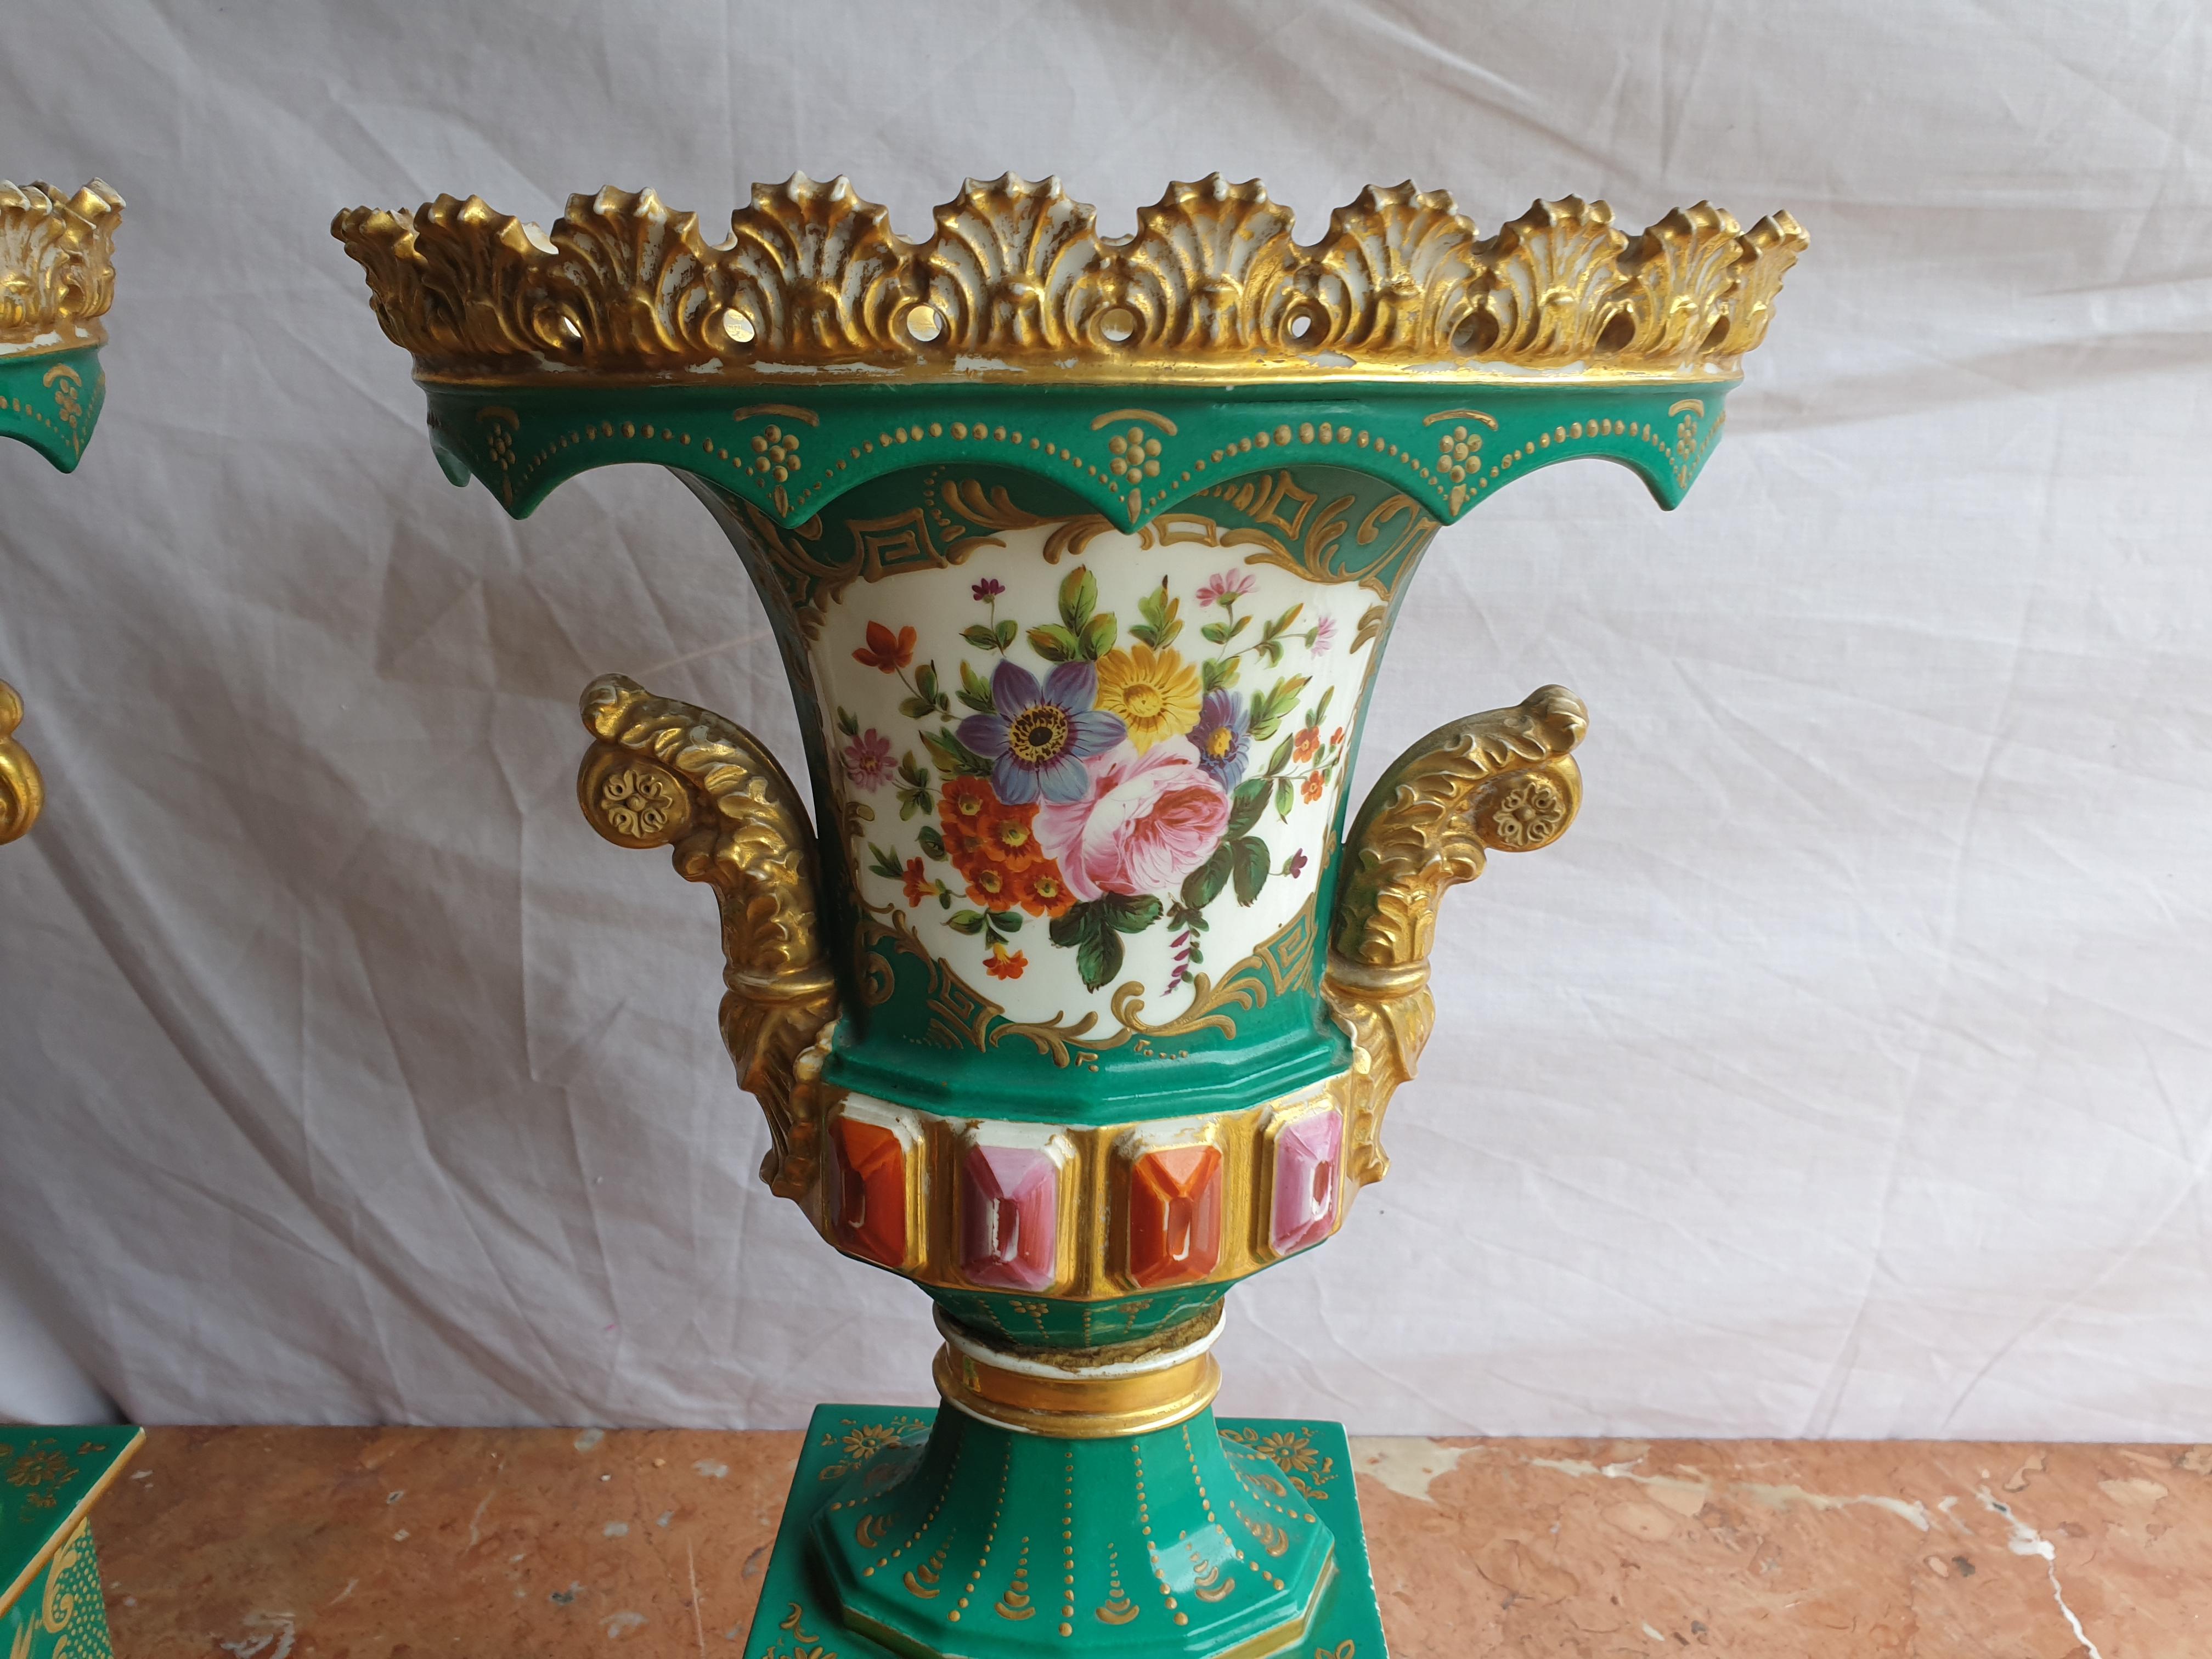 An extremely impressive pair of Jacob Petit hand painted emerald green vases finished with 24k gold gilt fine detailing. On one side of the vase it depicts a hand painted panel with an assortment of summer flowers and on the other side a finely